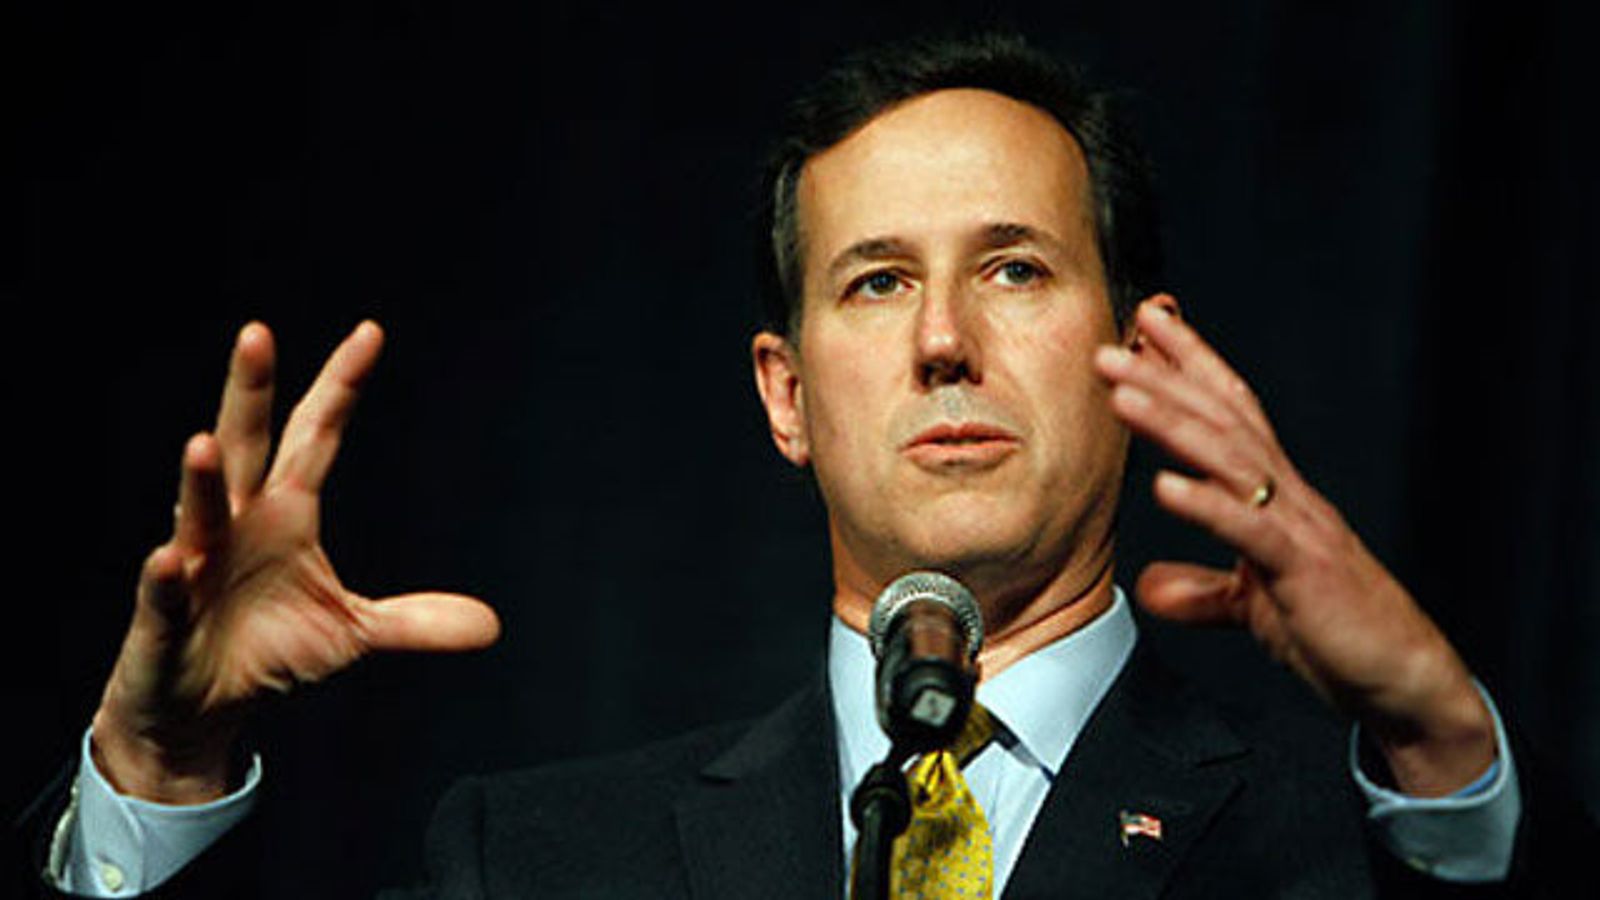 Rick Santorum Moves 'Porn' From Top to Bottom of Issues Page